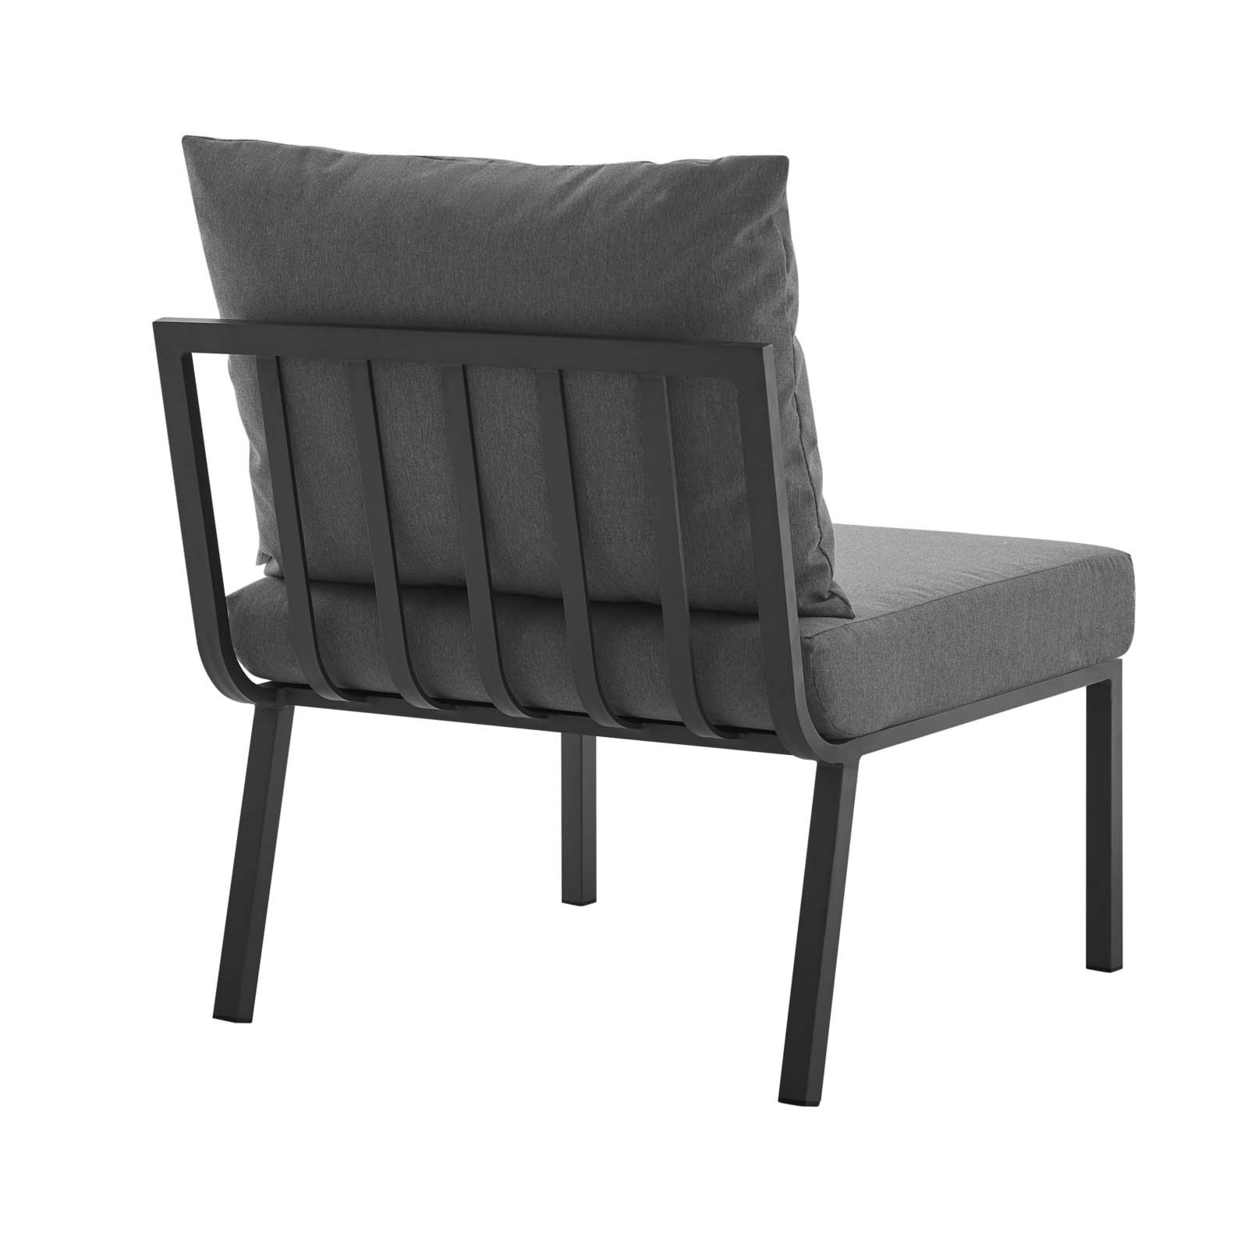 Riverside Outdoor Patio Aluminum Armless Chair,Gray Charcoal